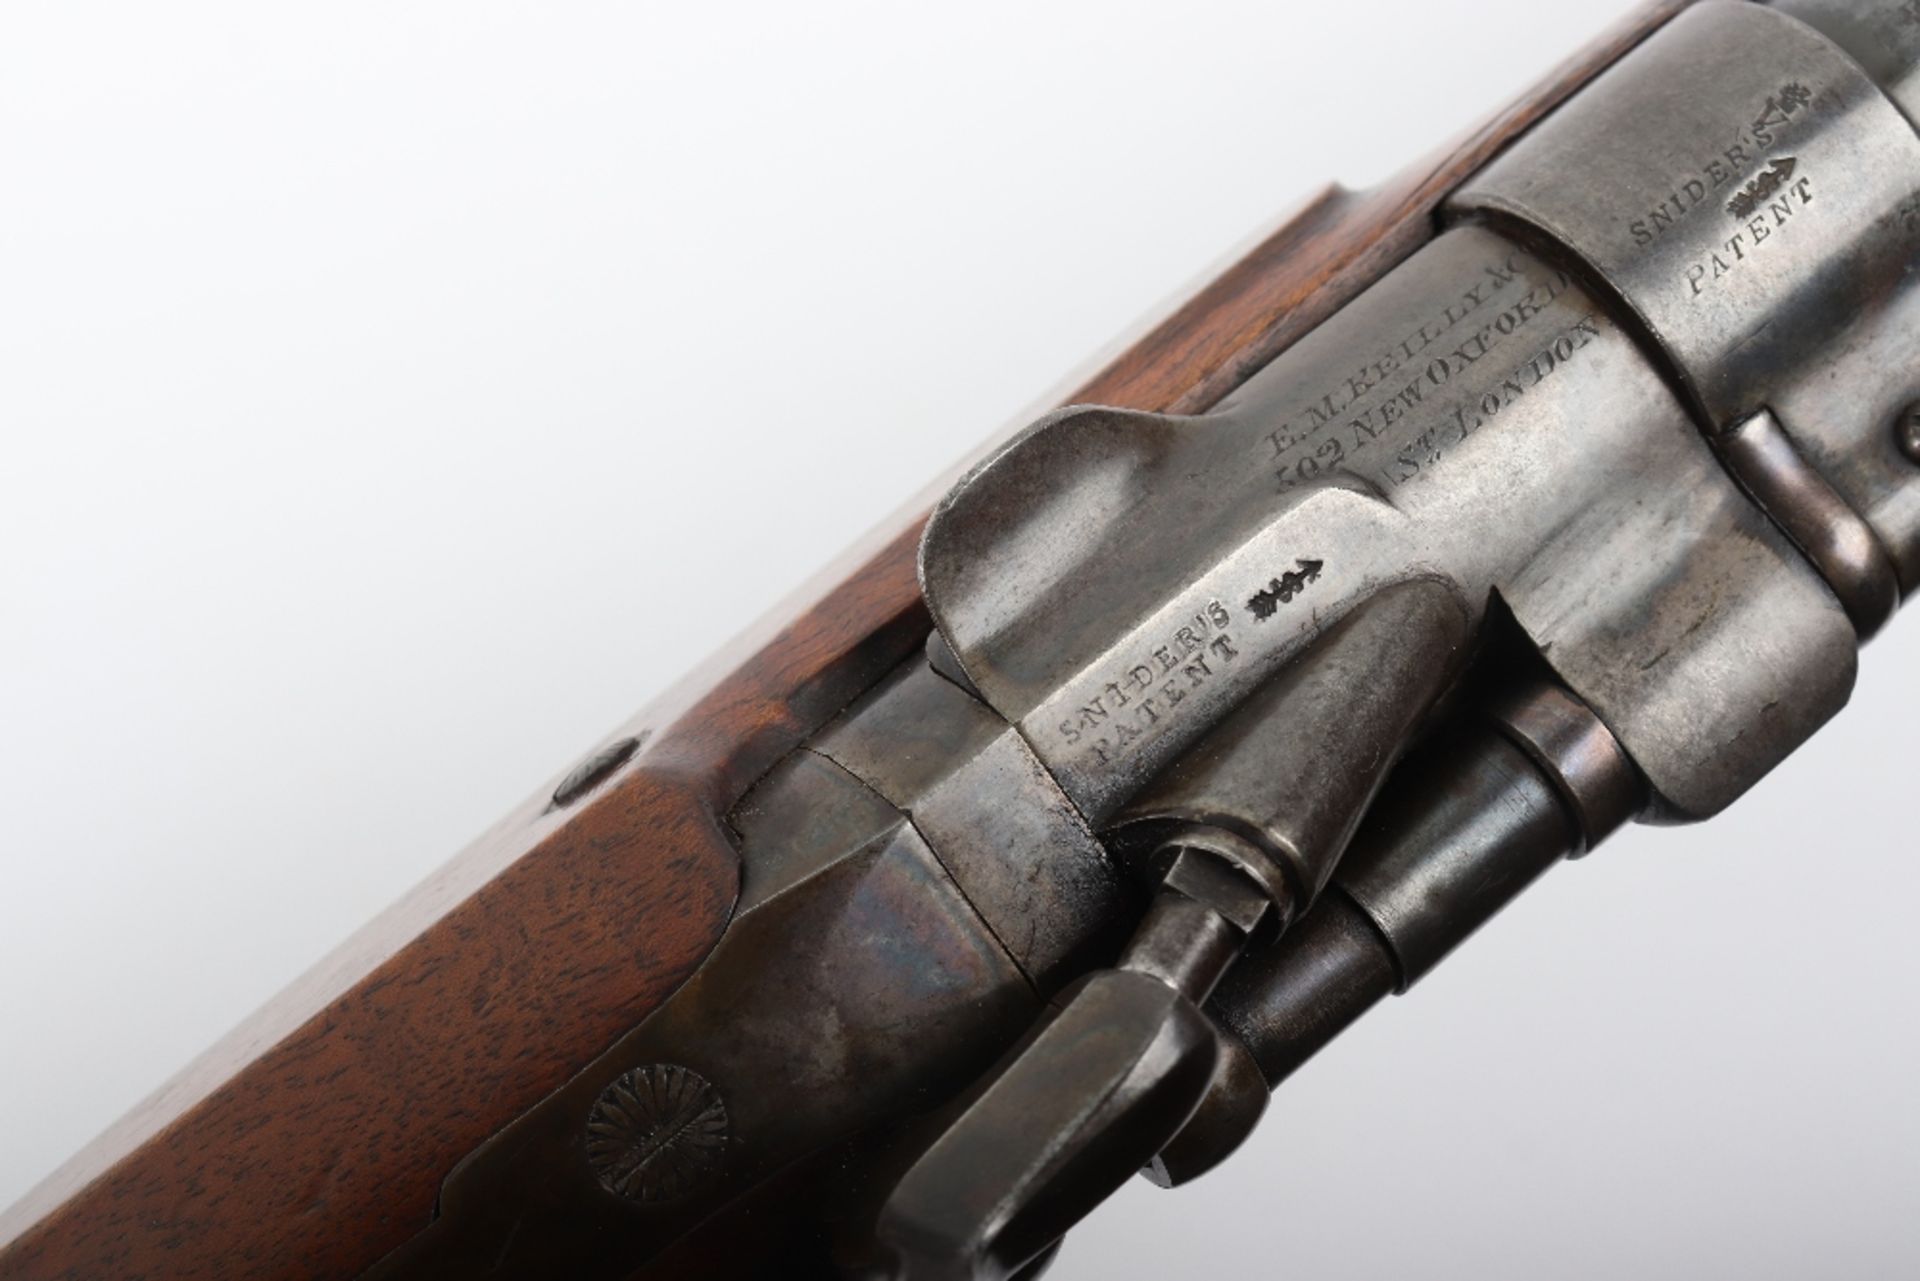 25-Bore Snider Action Breech Loading Sporting Rifle by Reilly No. 15227 - Image 7 of 14